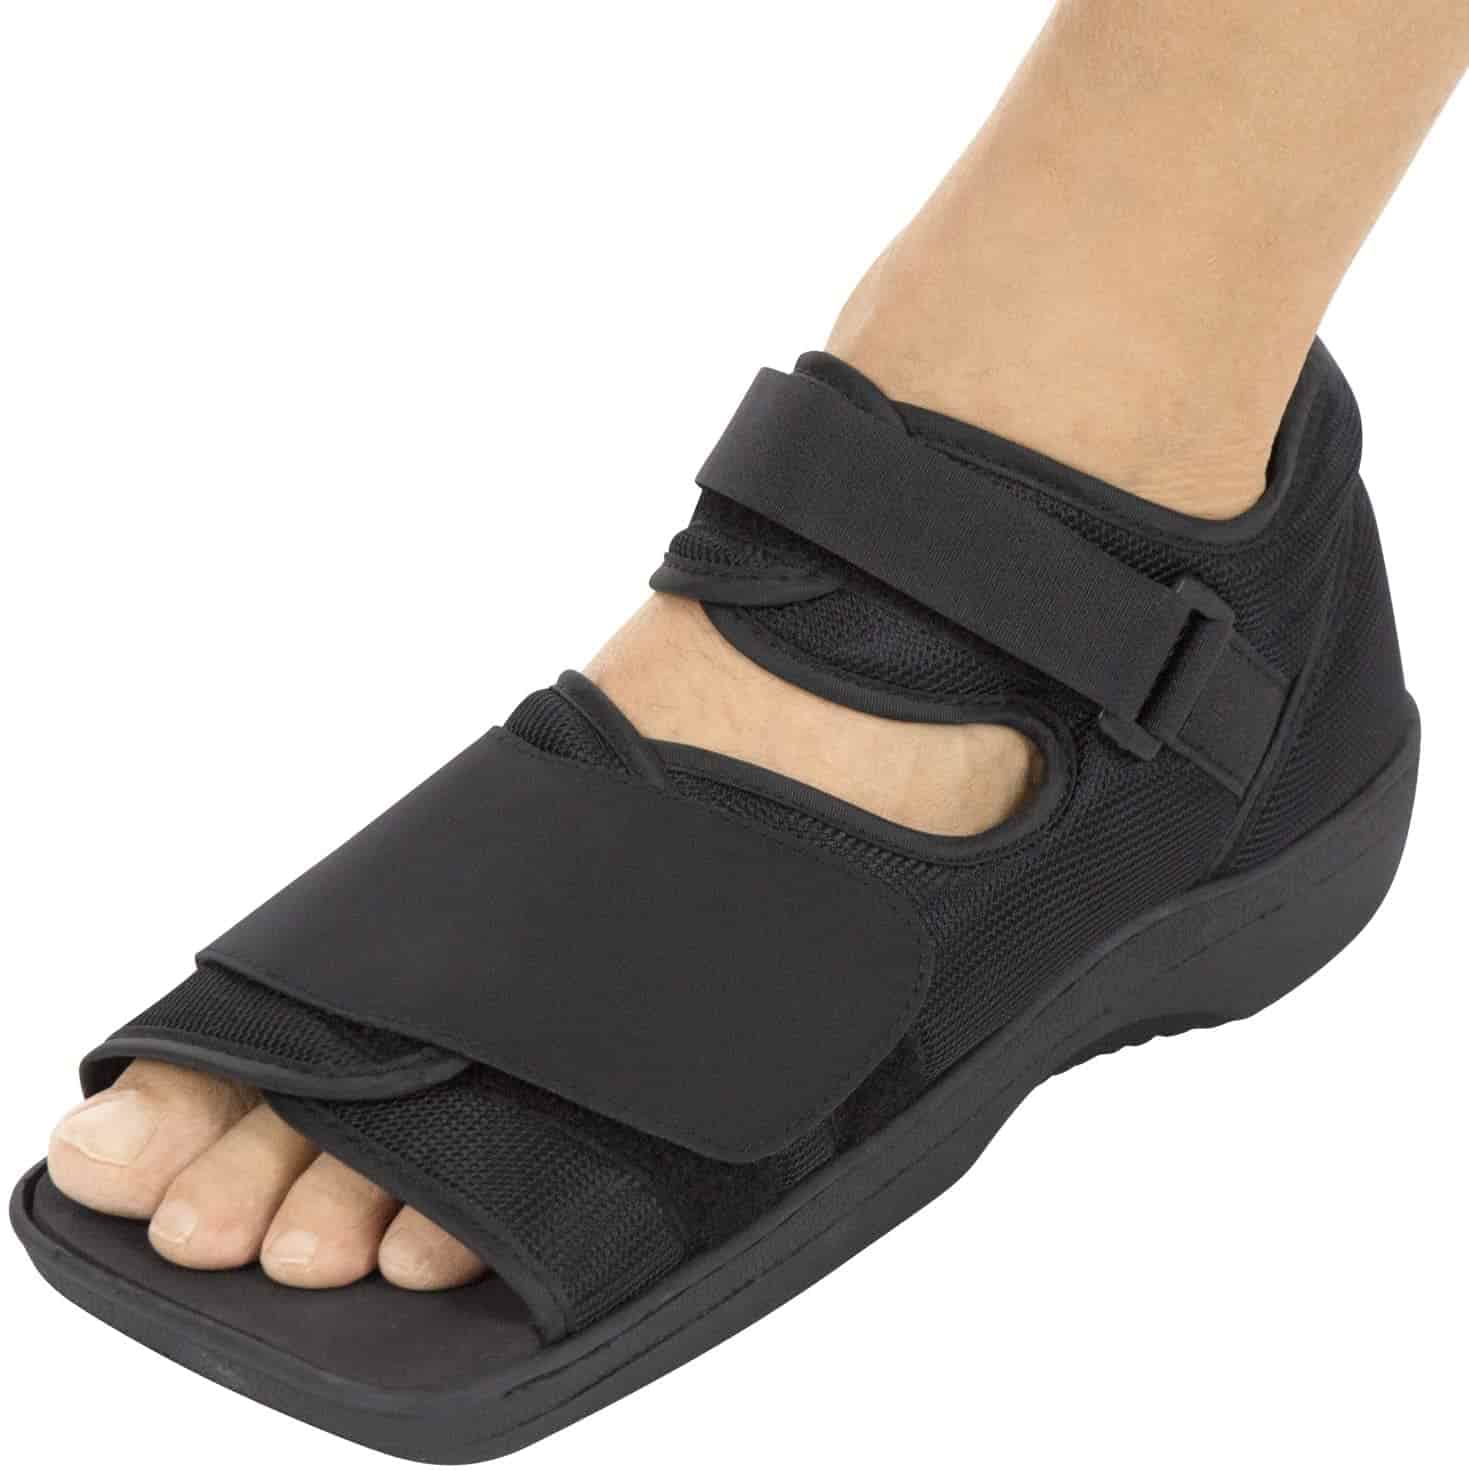 Top 10 Best Shoes For Swollen Foot Reviews Shoes For Swollen Feet!